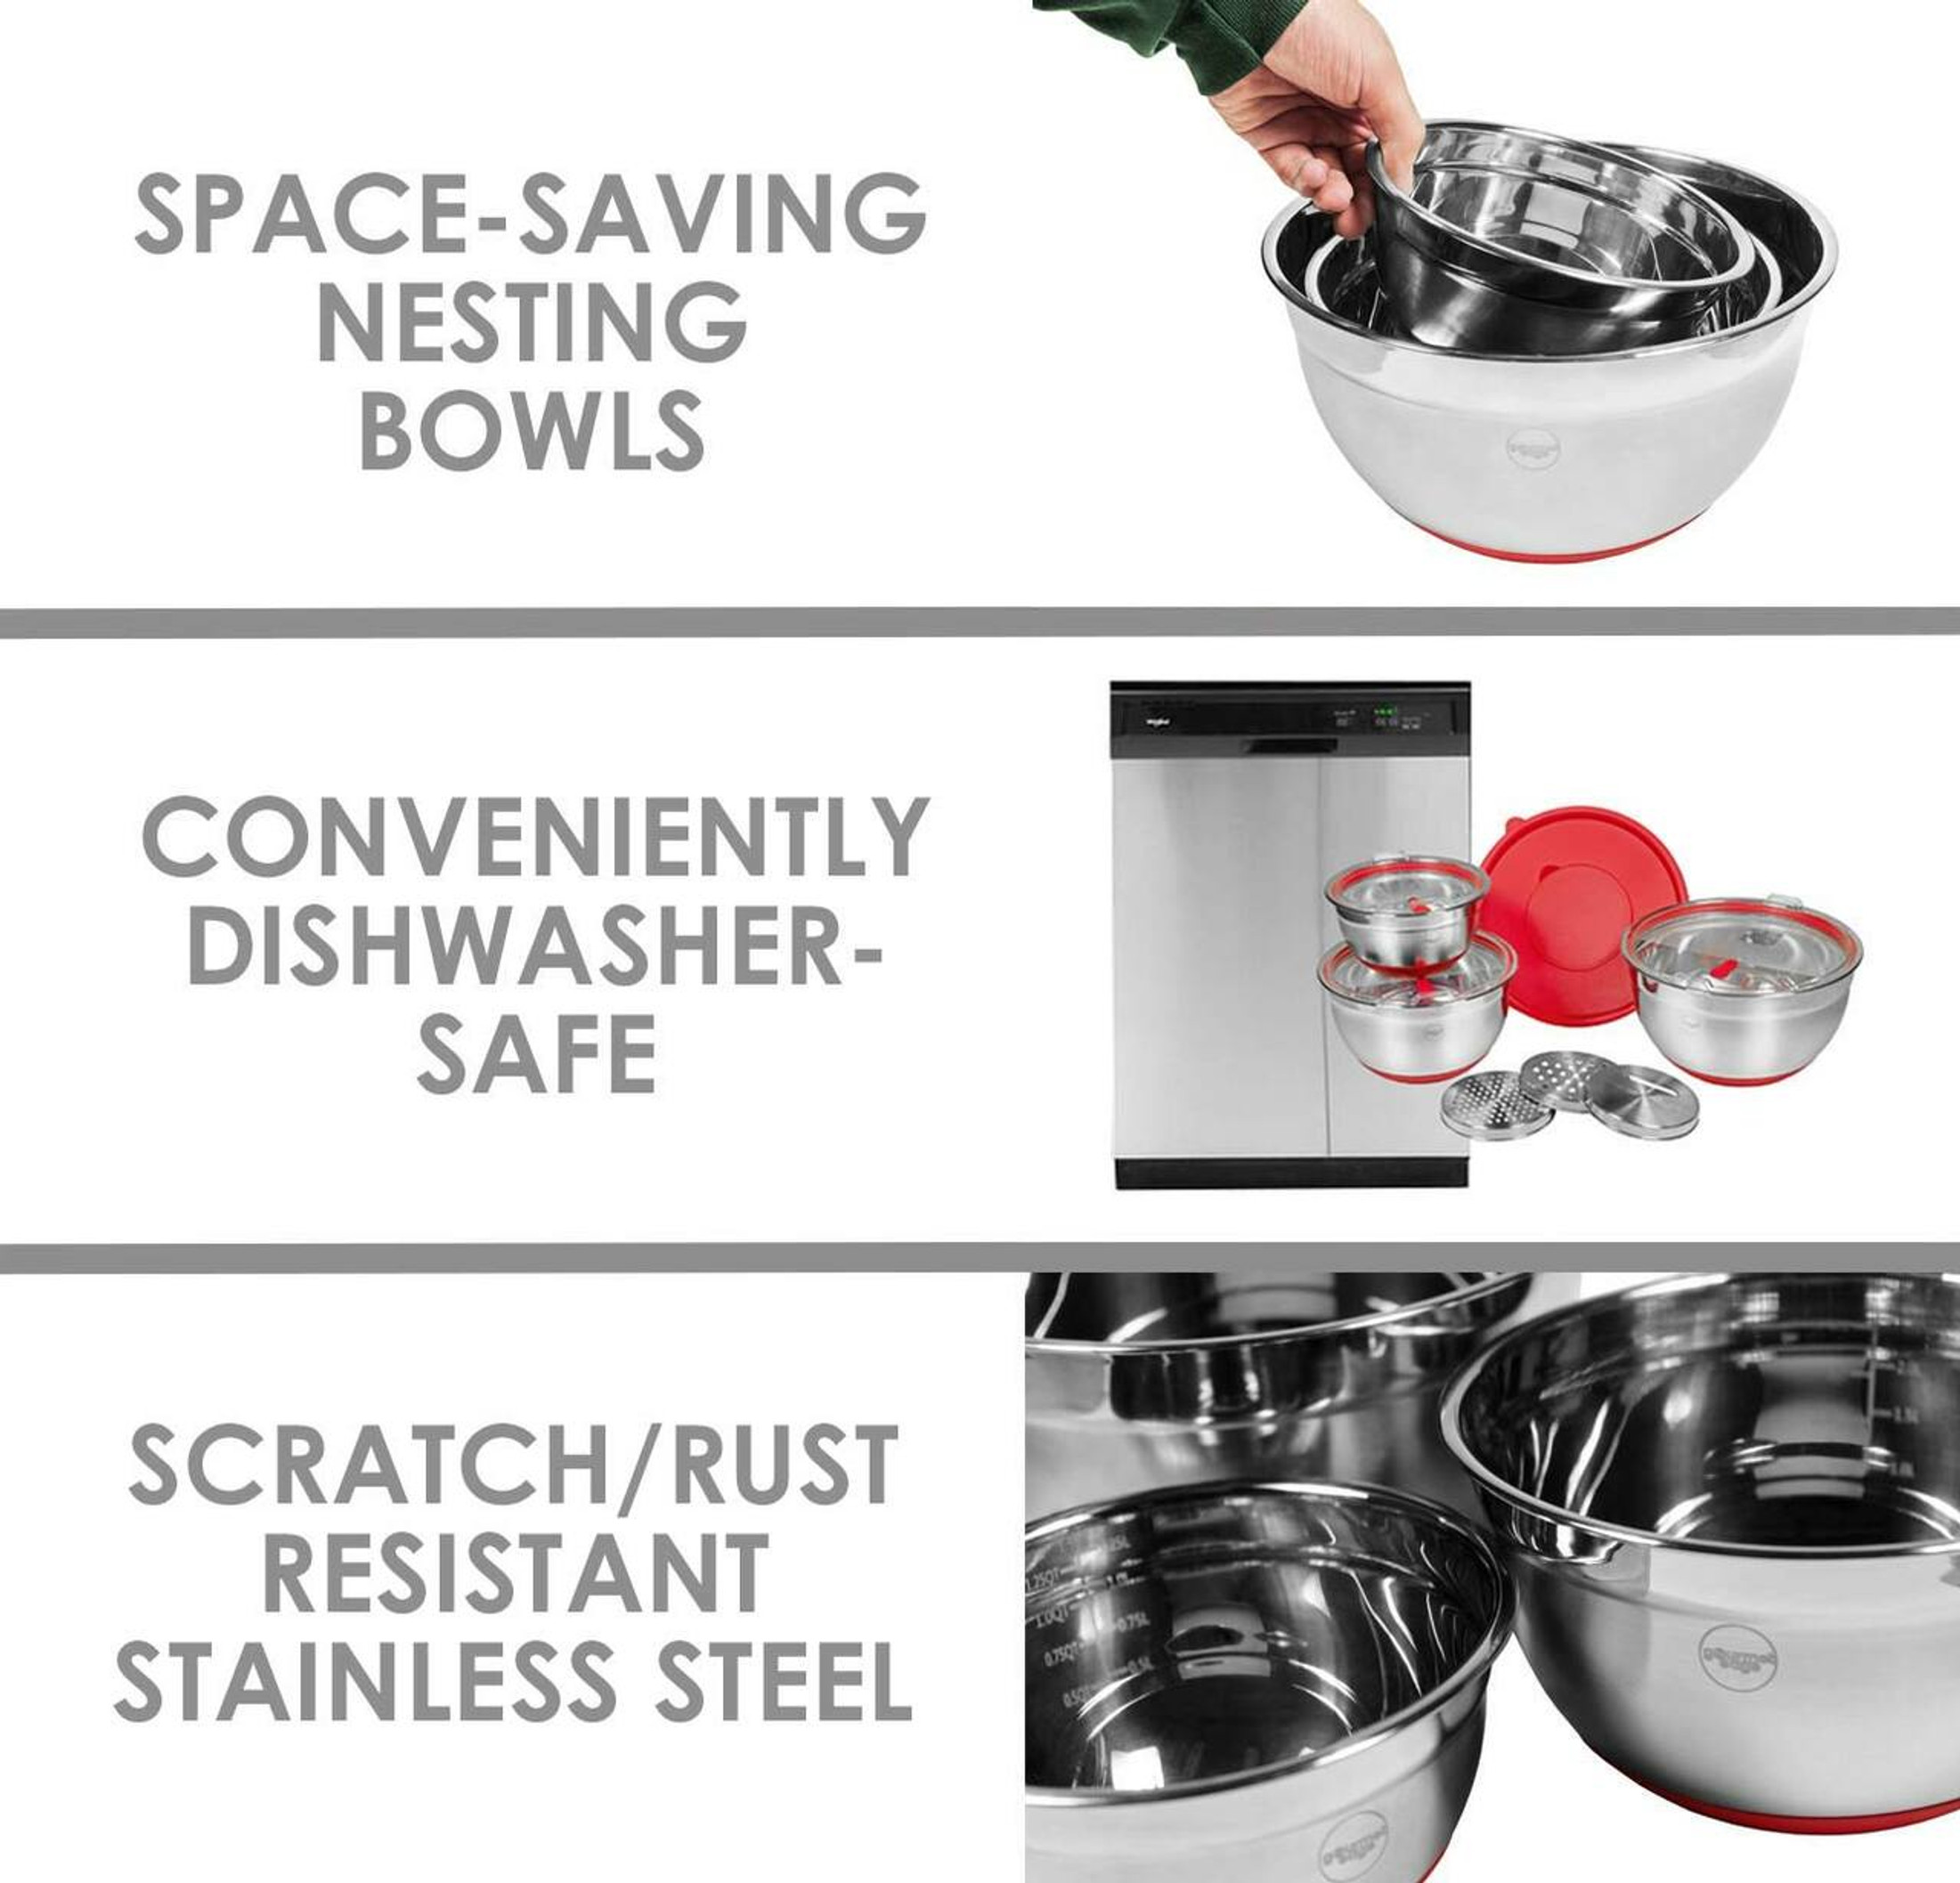 Gourmet Edge Stainless Steel Mixing Bowl Set For Baking, Cooking In Home Kitchen (10 Piece)